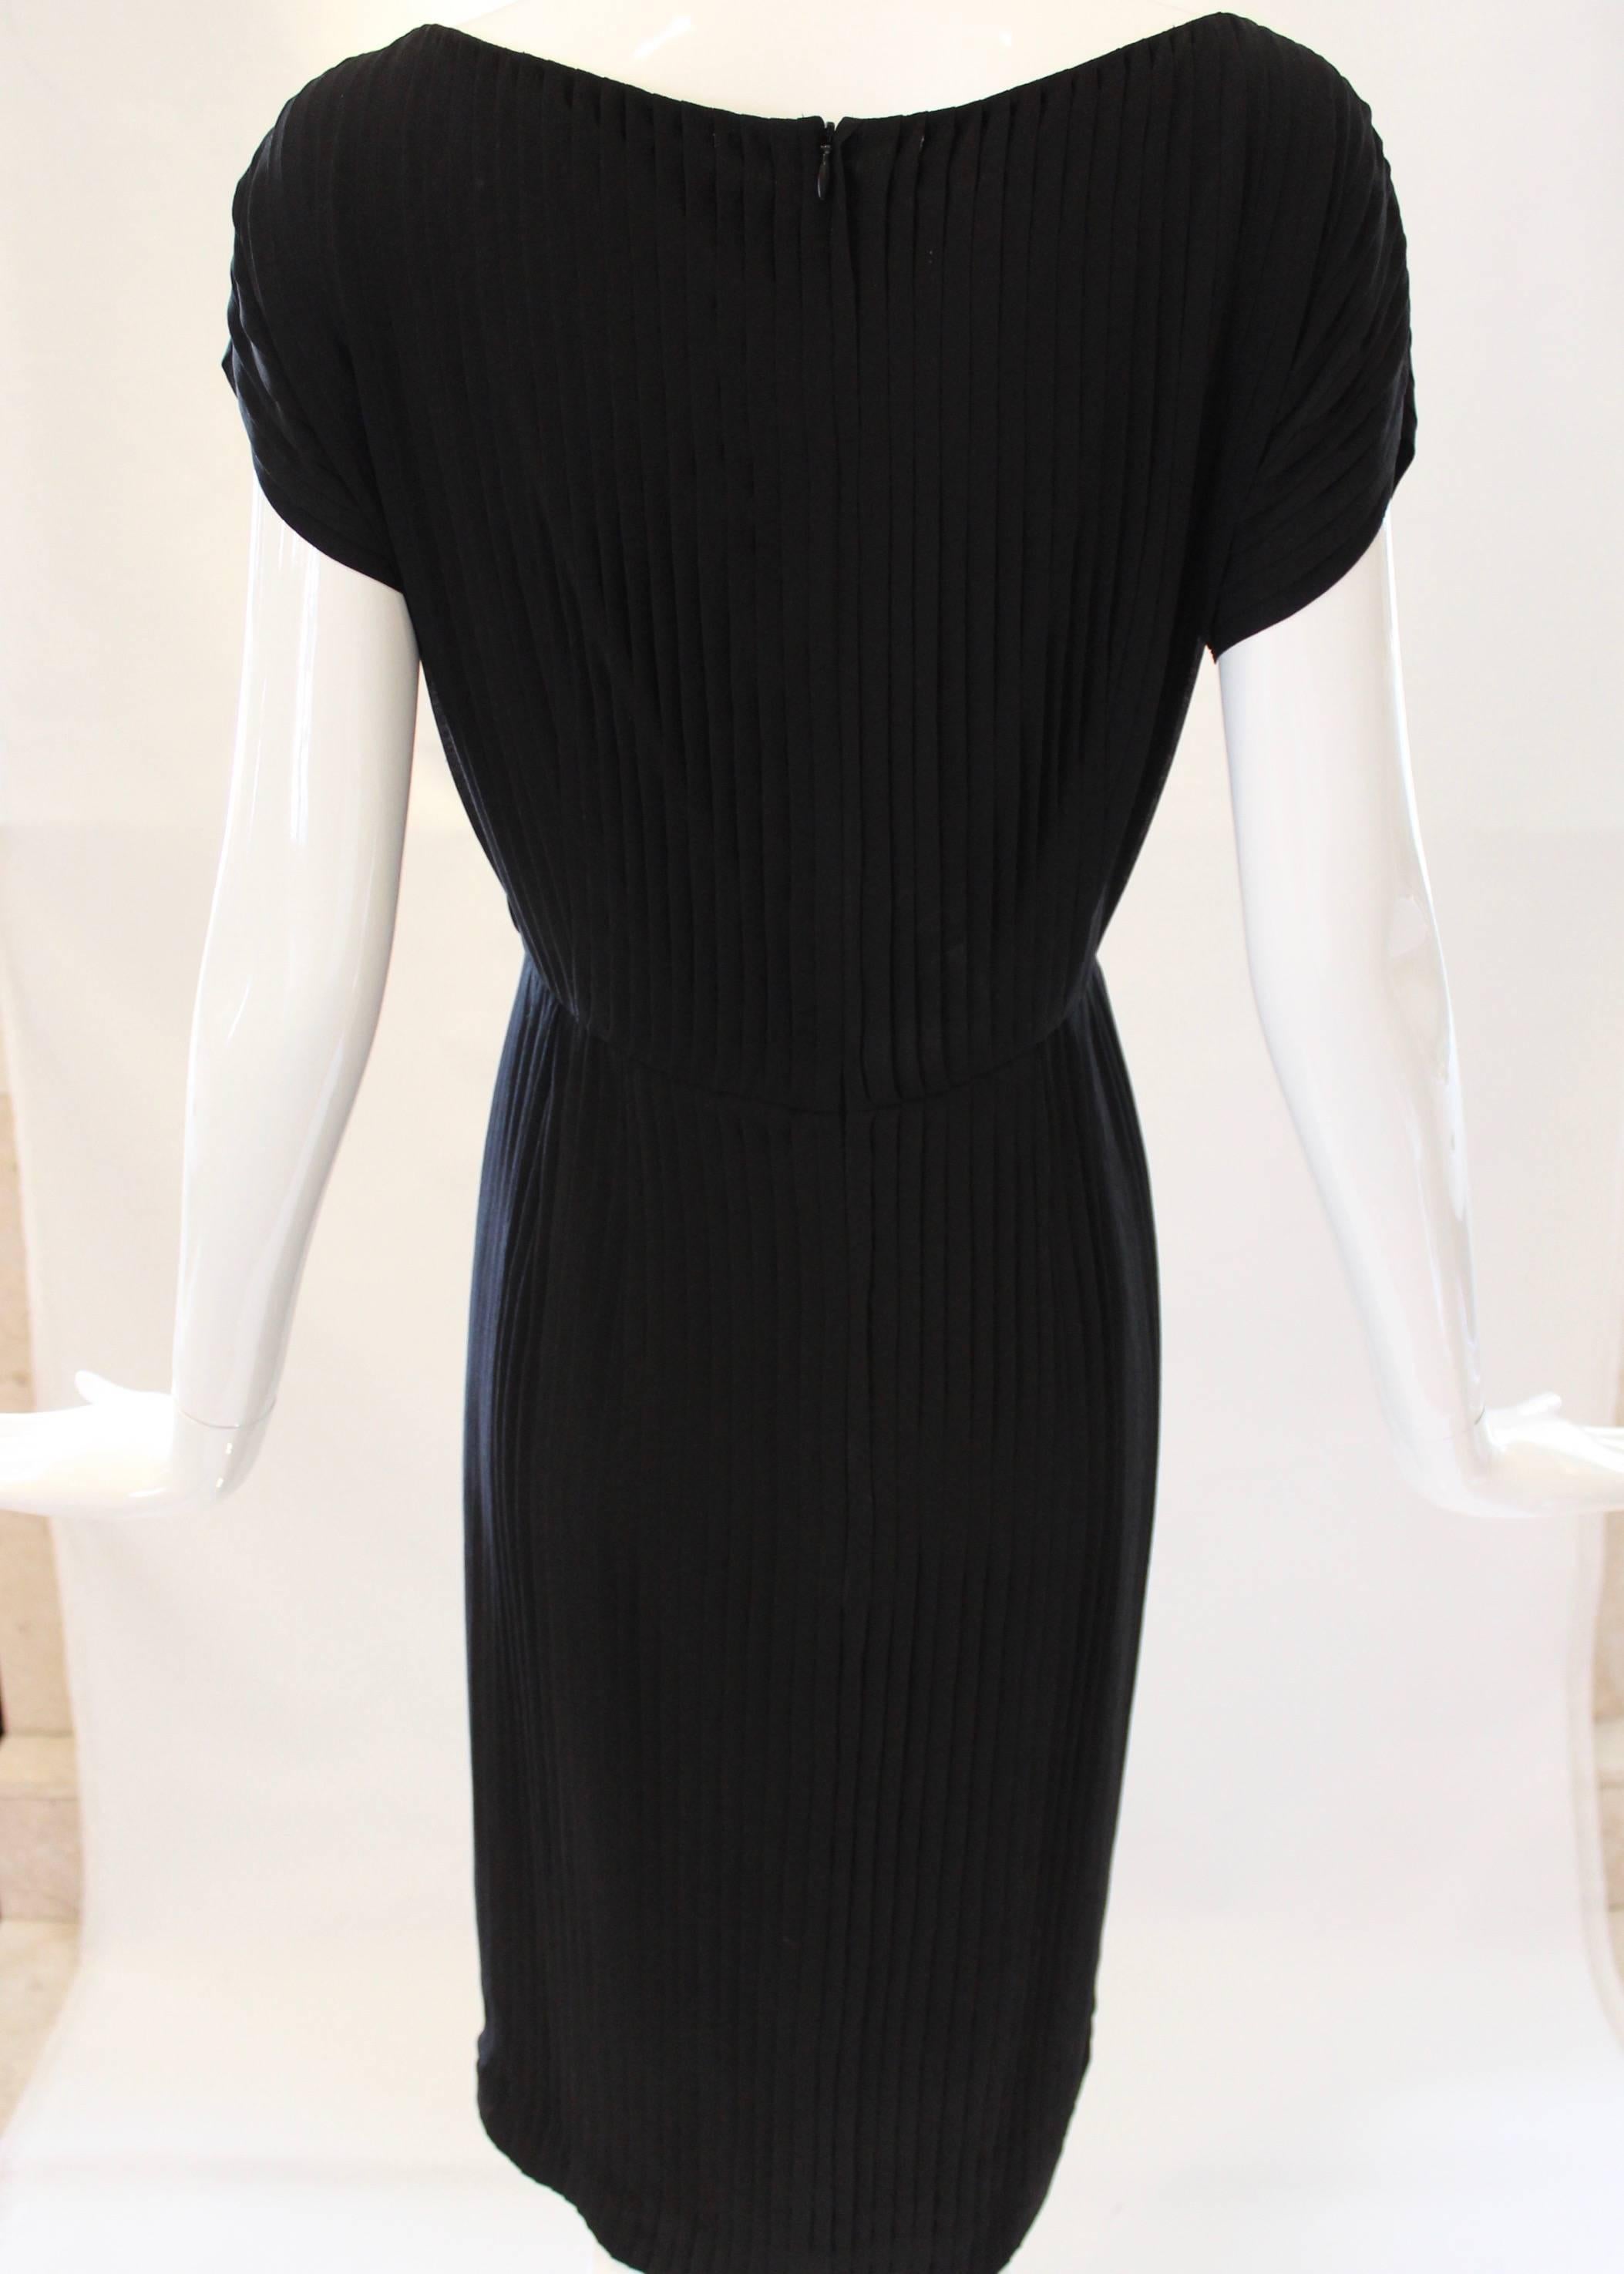 No wardrobe is complete without a stunning LBD! This black Akris dress boasts small pleats throughout, has a bateau neckline and features a hidden zipper at the back.. This minimalist style dress is cinched with an elastic waist and falls right at